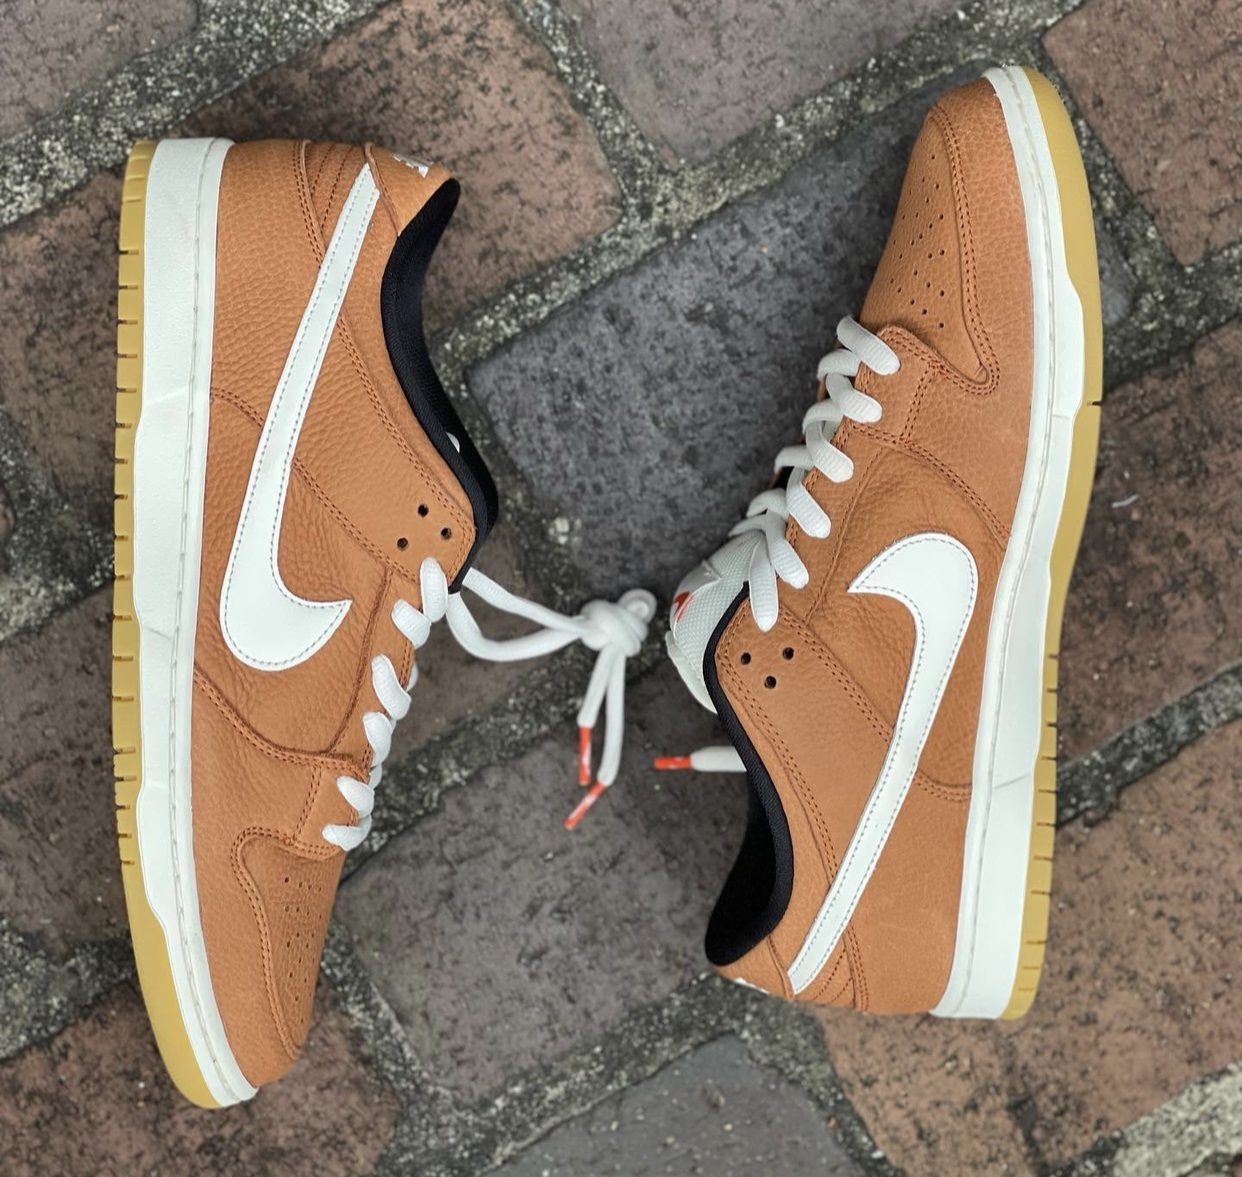 Nike SB Dunk Low Dark Russet DH1319-200 Release Date